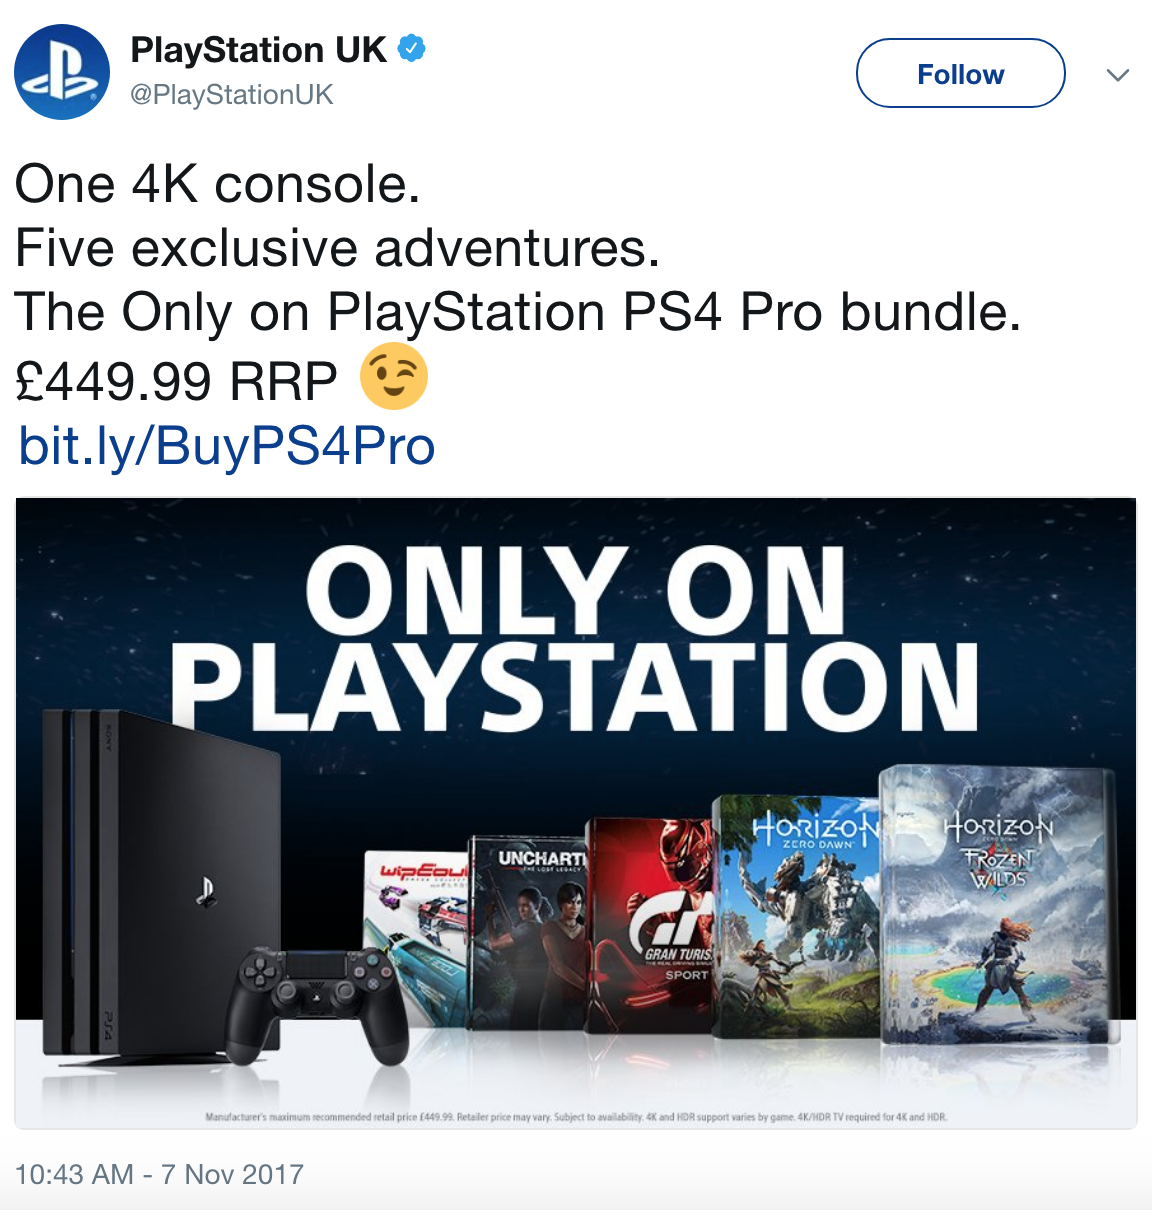 Necklet Gå vandreture Anemone fisk Xbox One X Is Here, So Sony UK Just Announced A PS4 Pro Bundle For The Same  Price - GameSpot